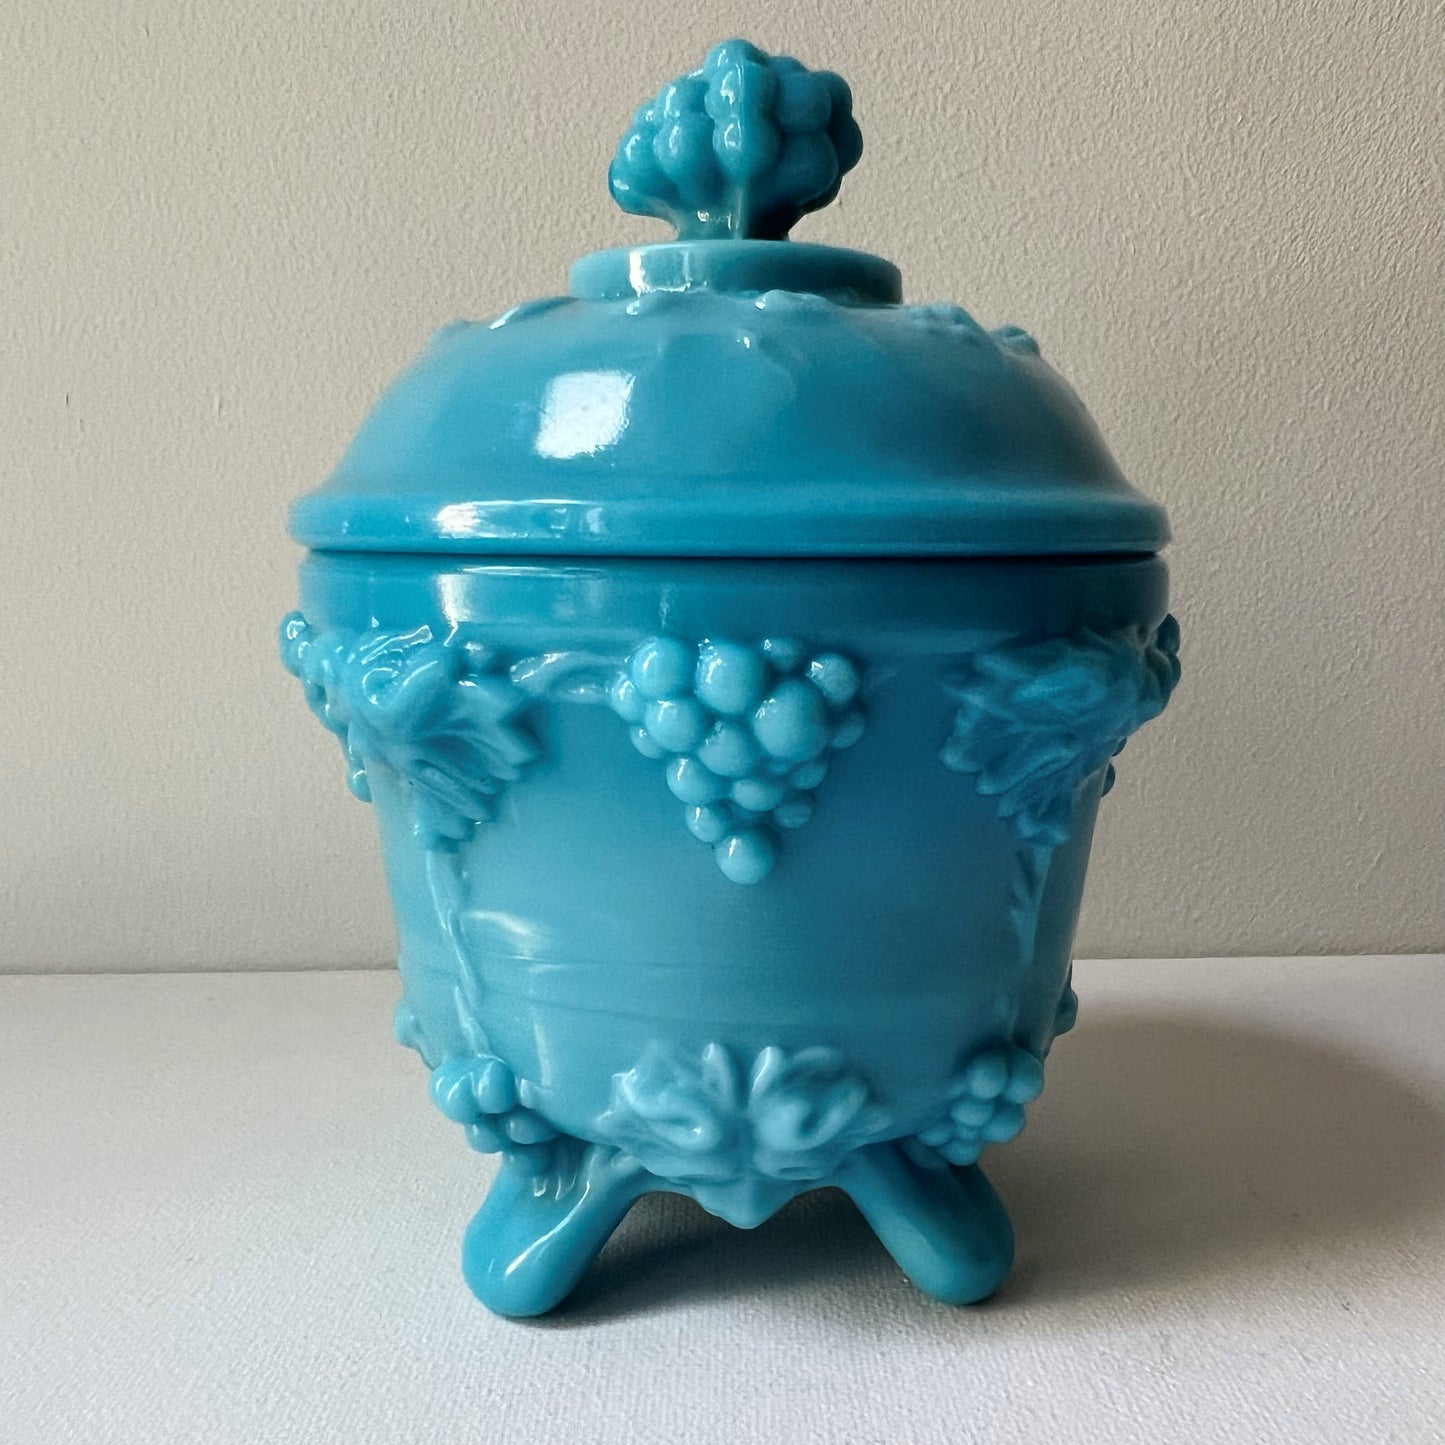 【Vintage】France - Portieux Vallerysthal 1930s Blue Milk Glass Candy Box